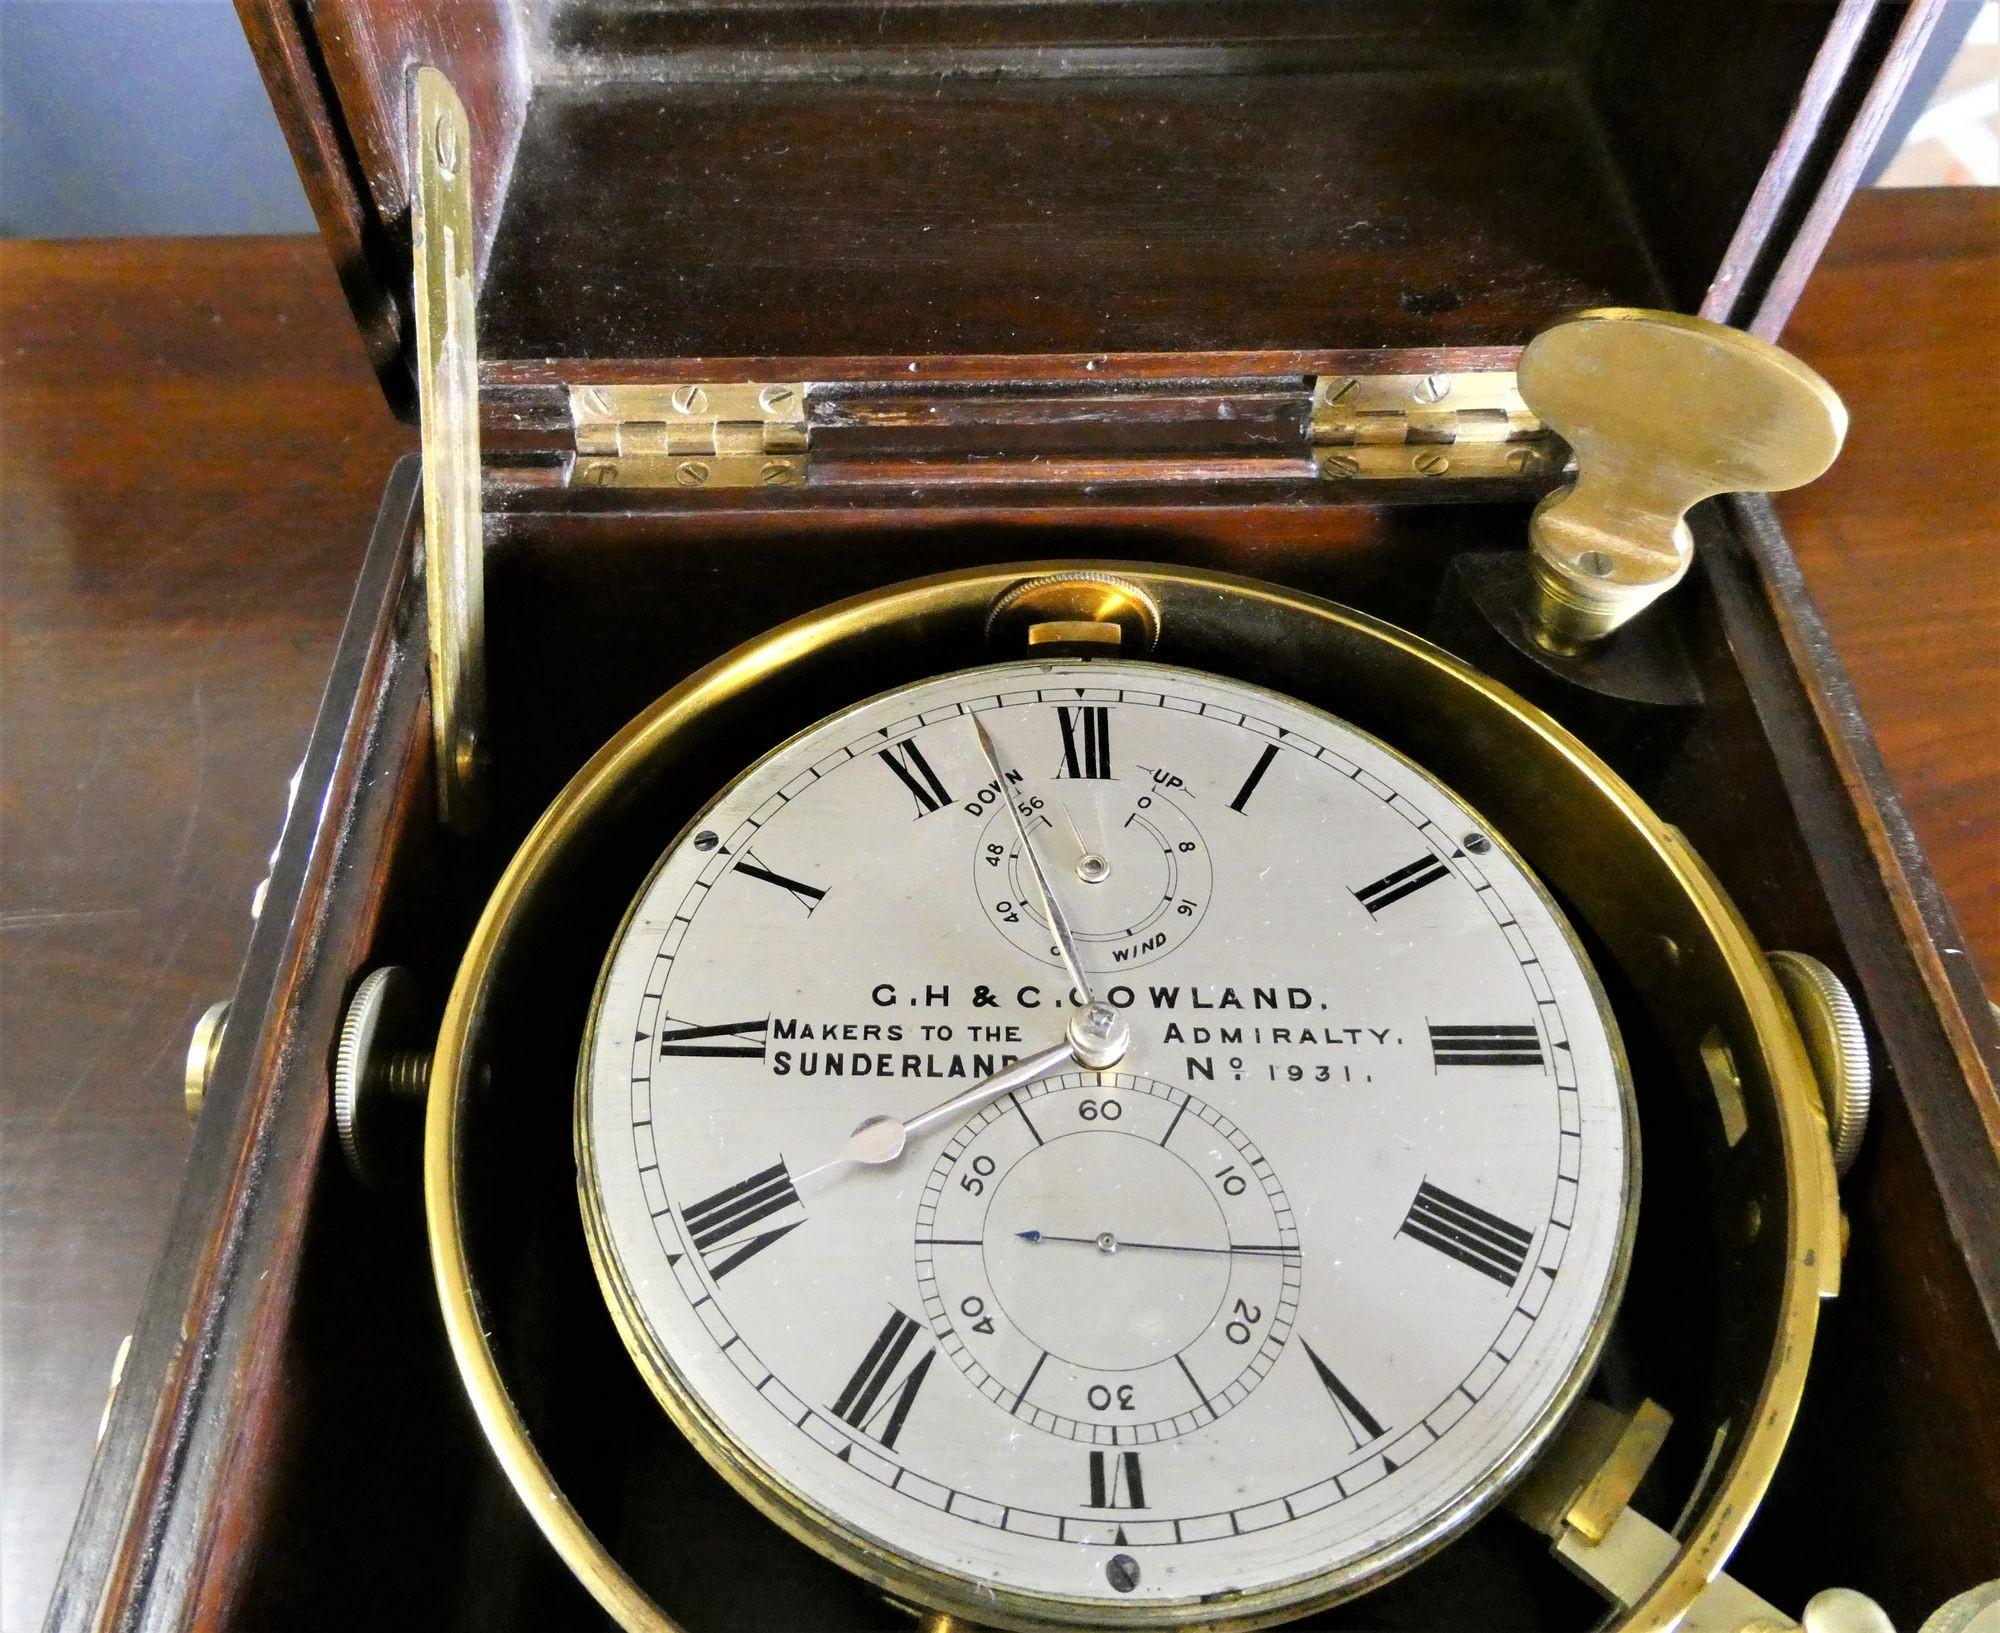 Two Day Marine Chronometer, G.H & C Gowland, Sunderland No.1931 In Good Condition For Sale In Norwich, GB